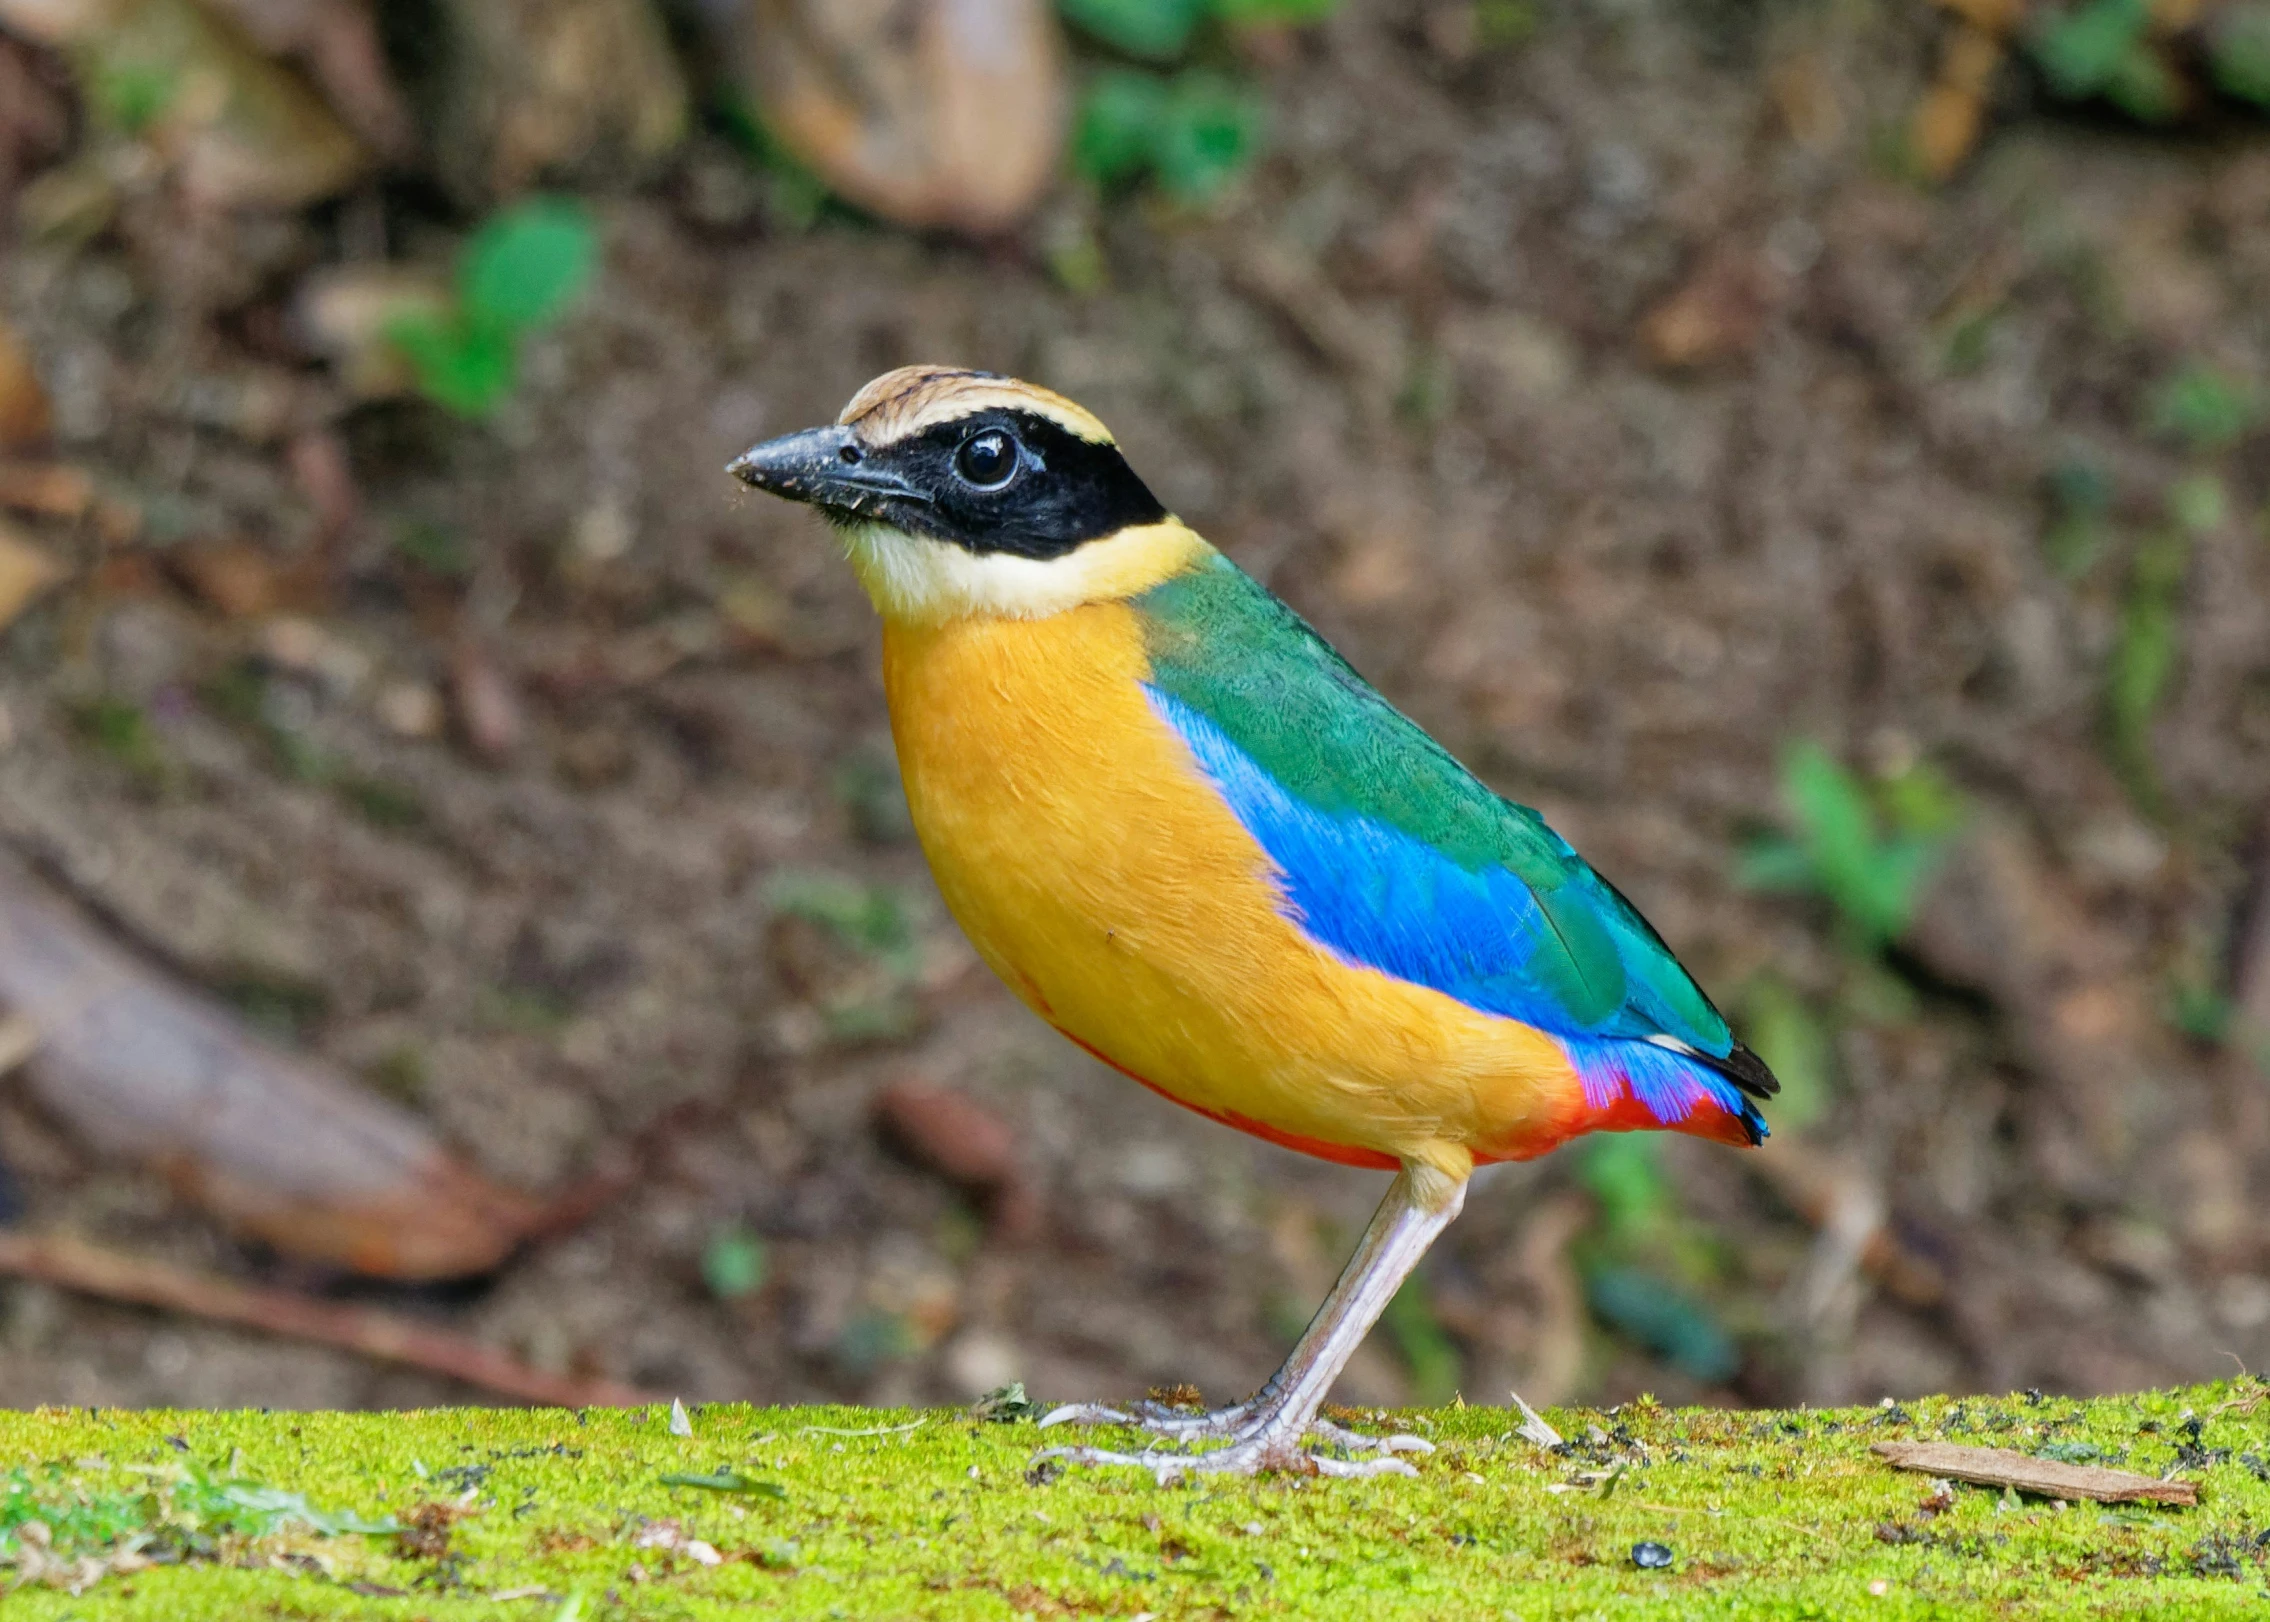 a blue, yellow and red bird standing on the ground